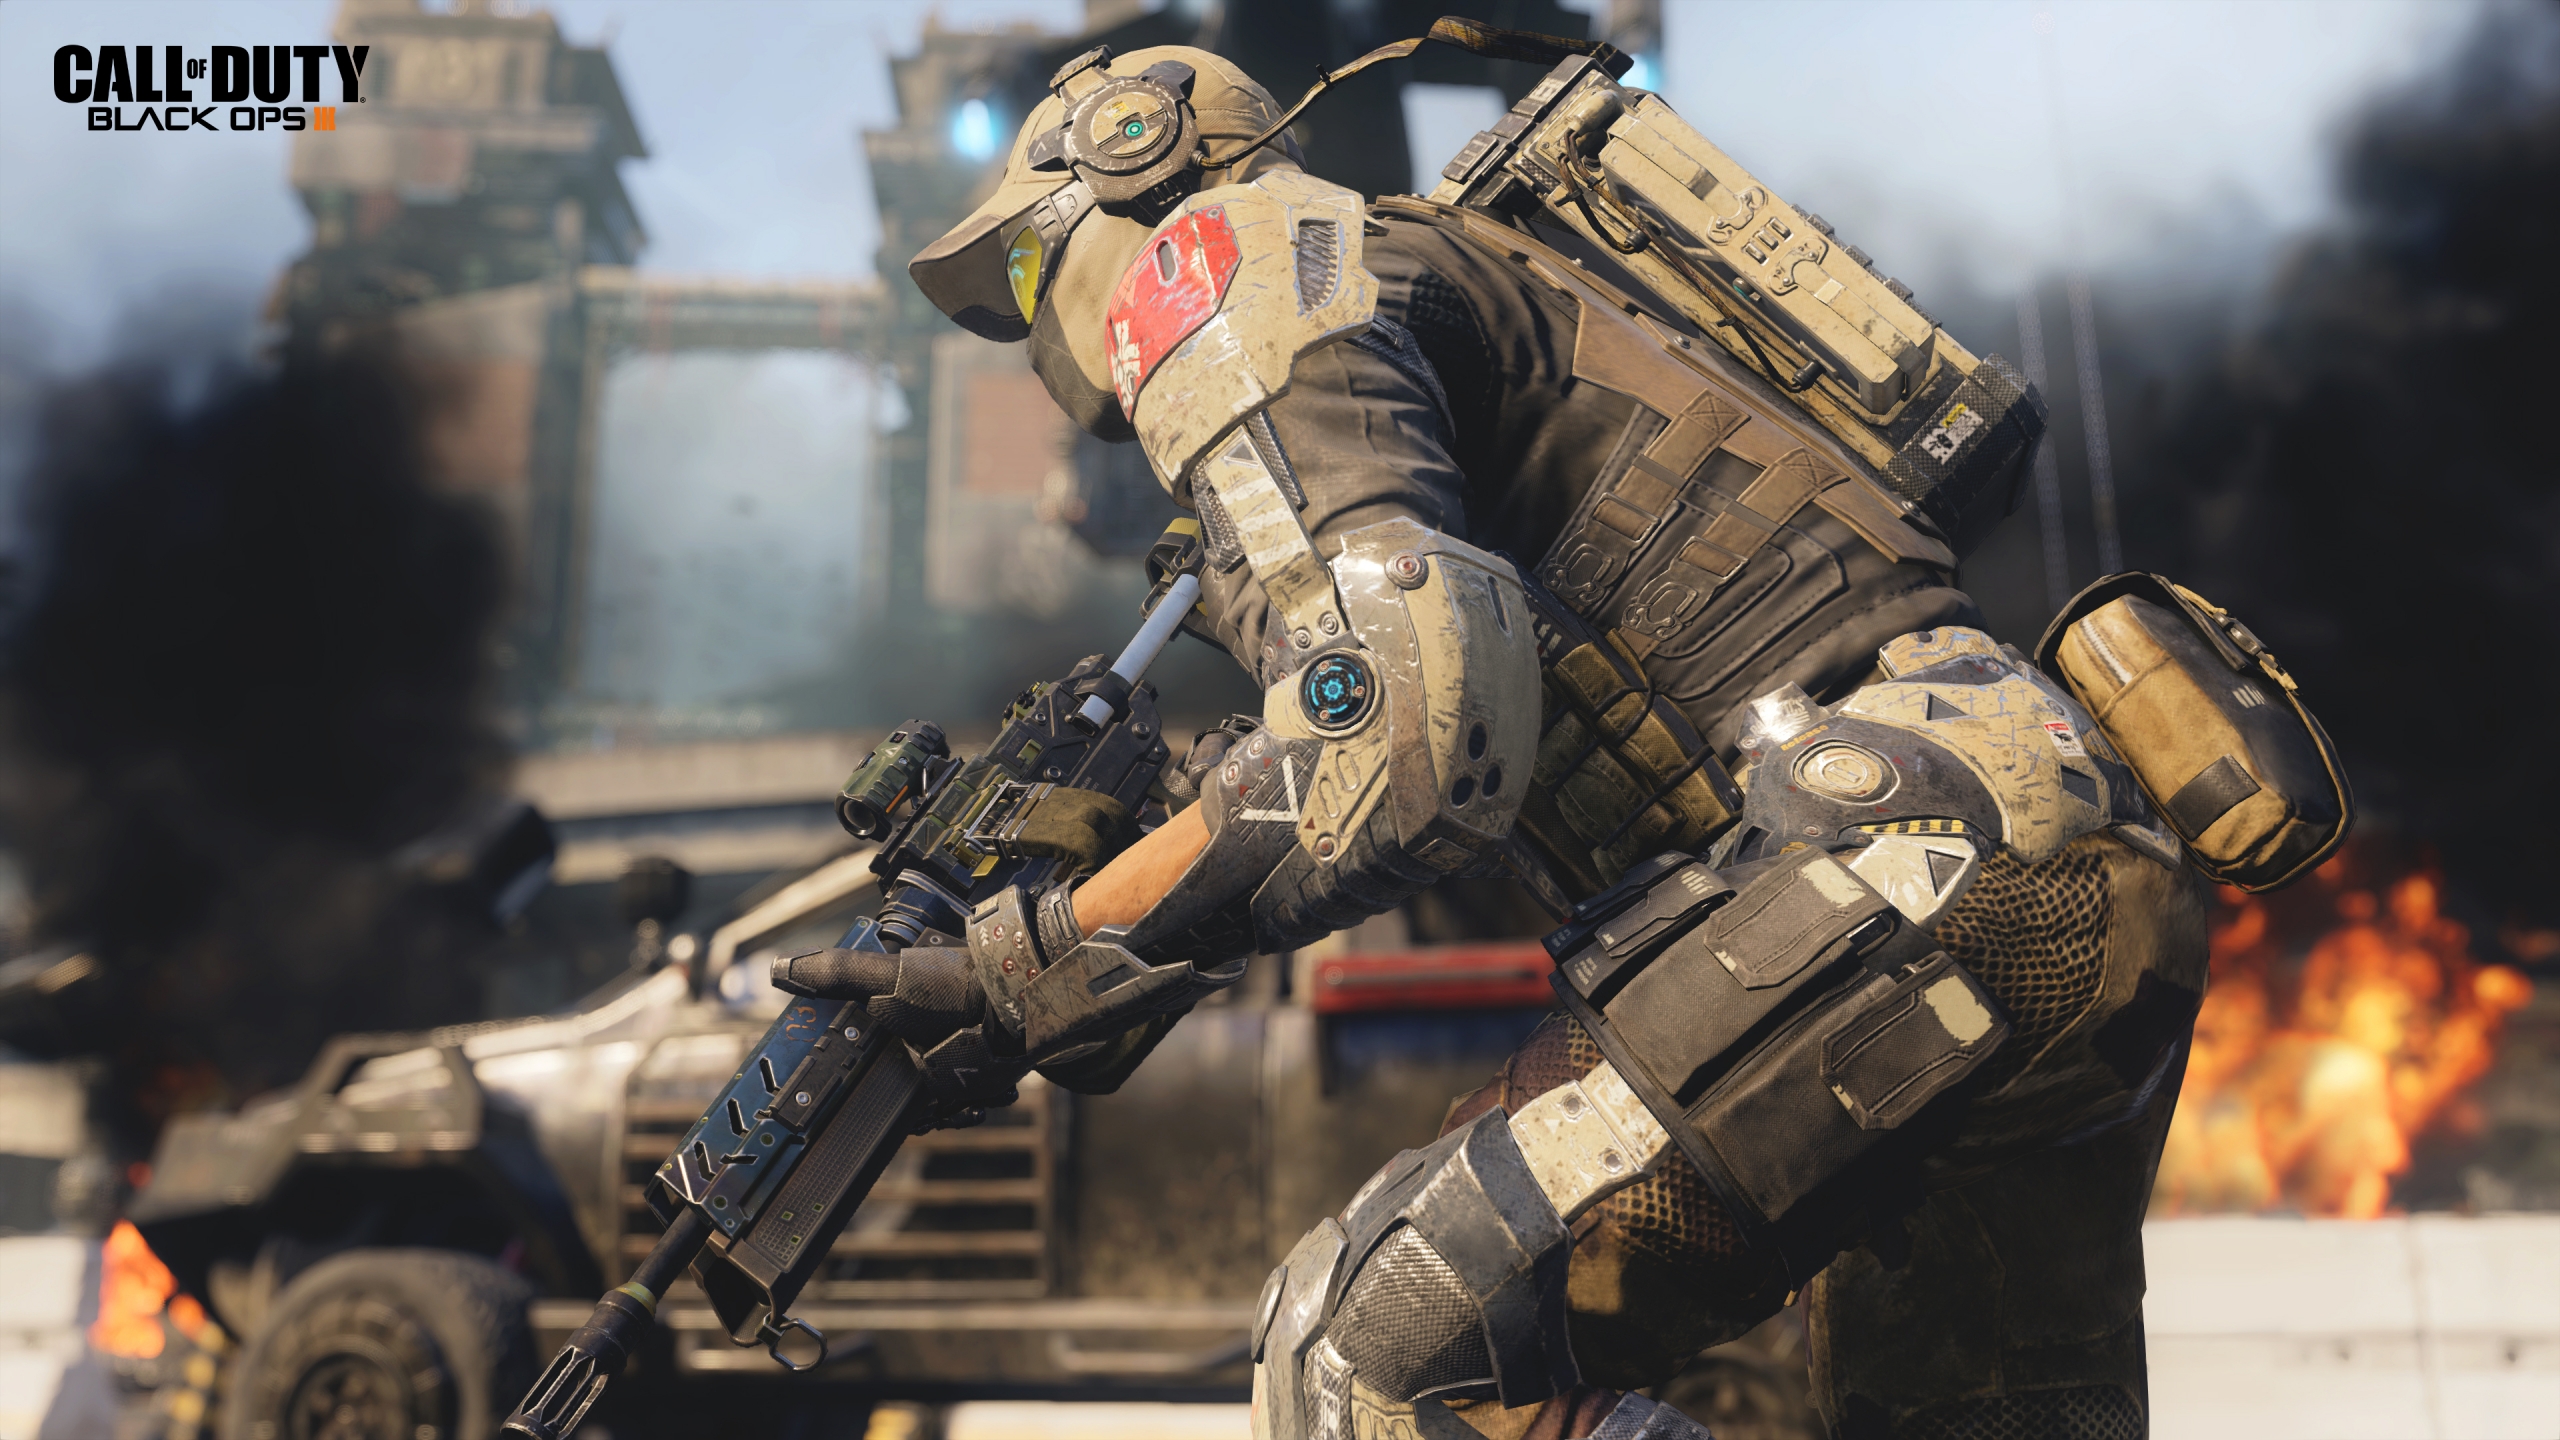 Call of Duty Black Ops III for 2560x1440 HDTV resolution